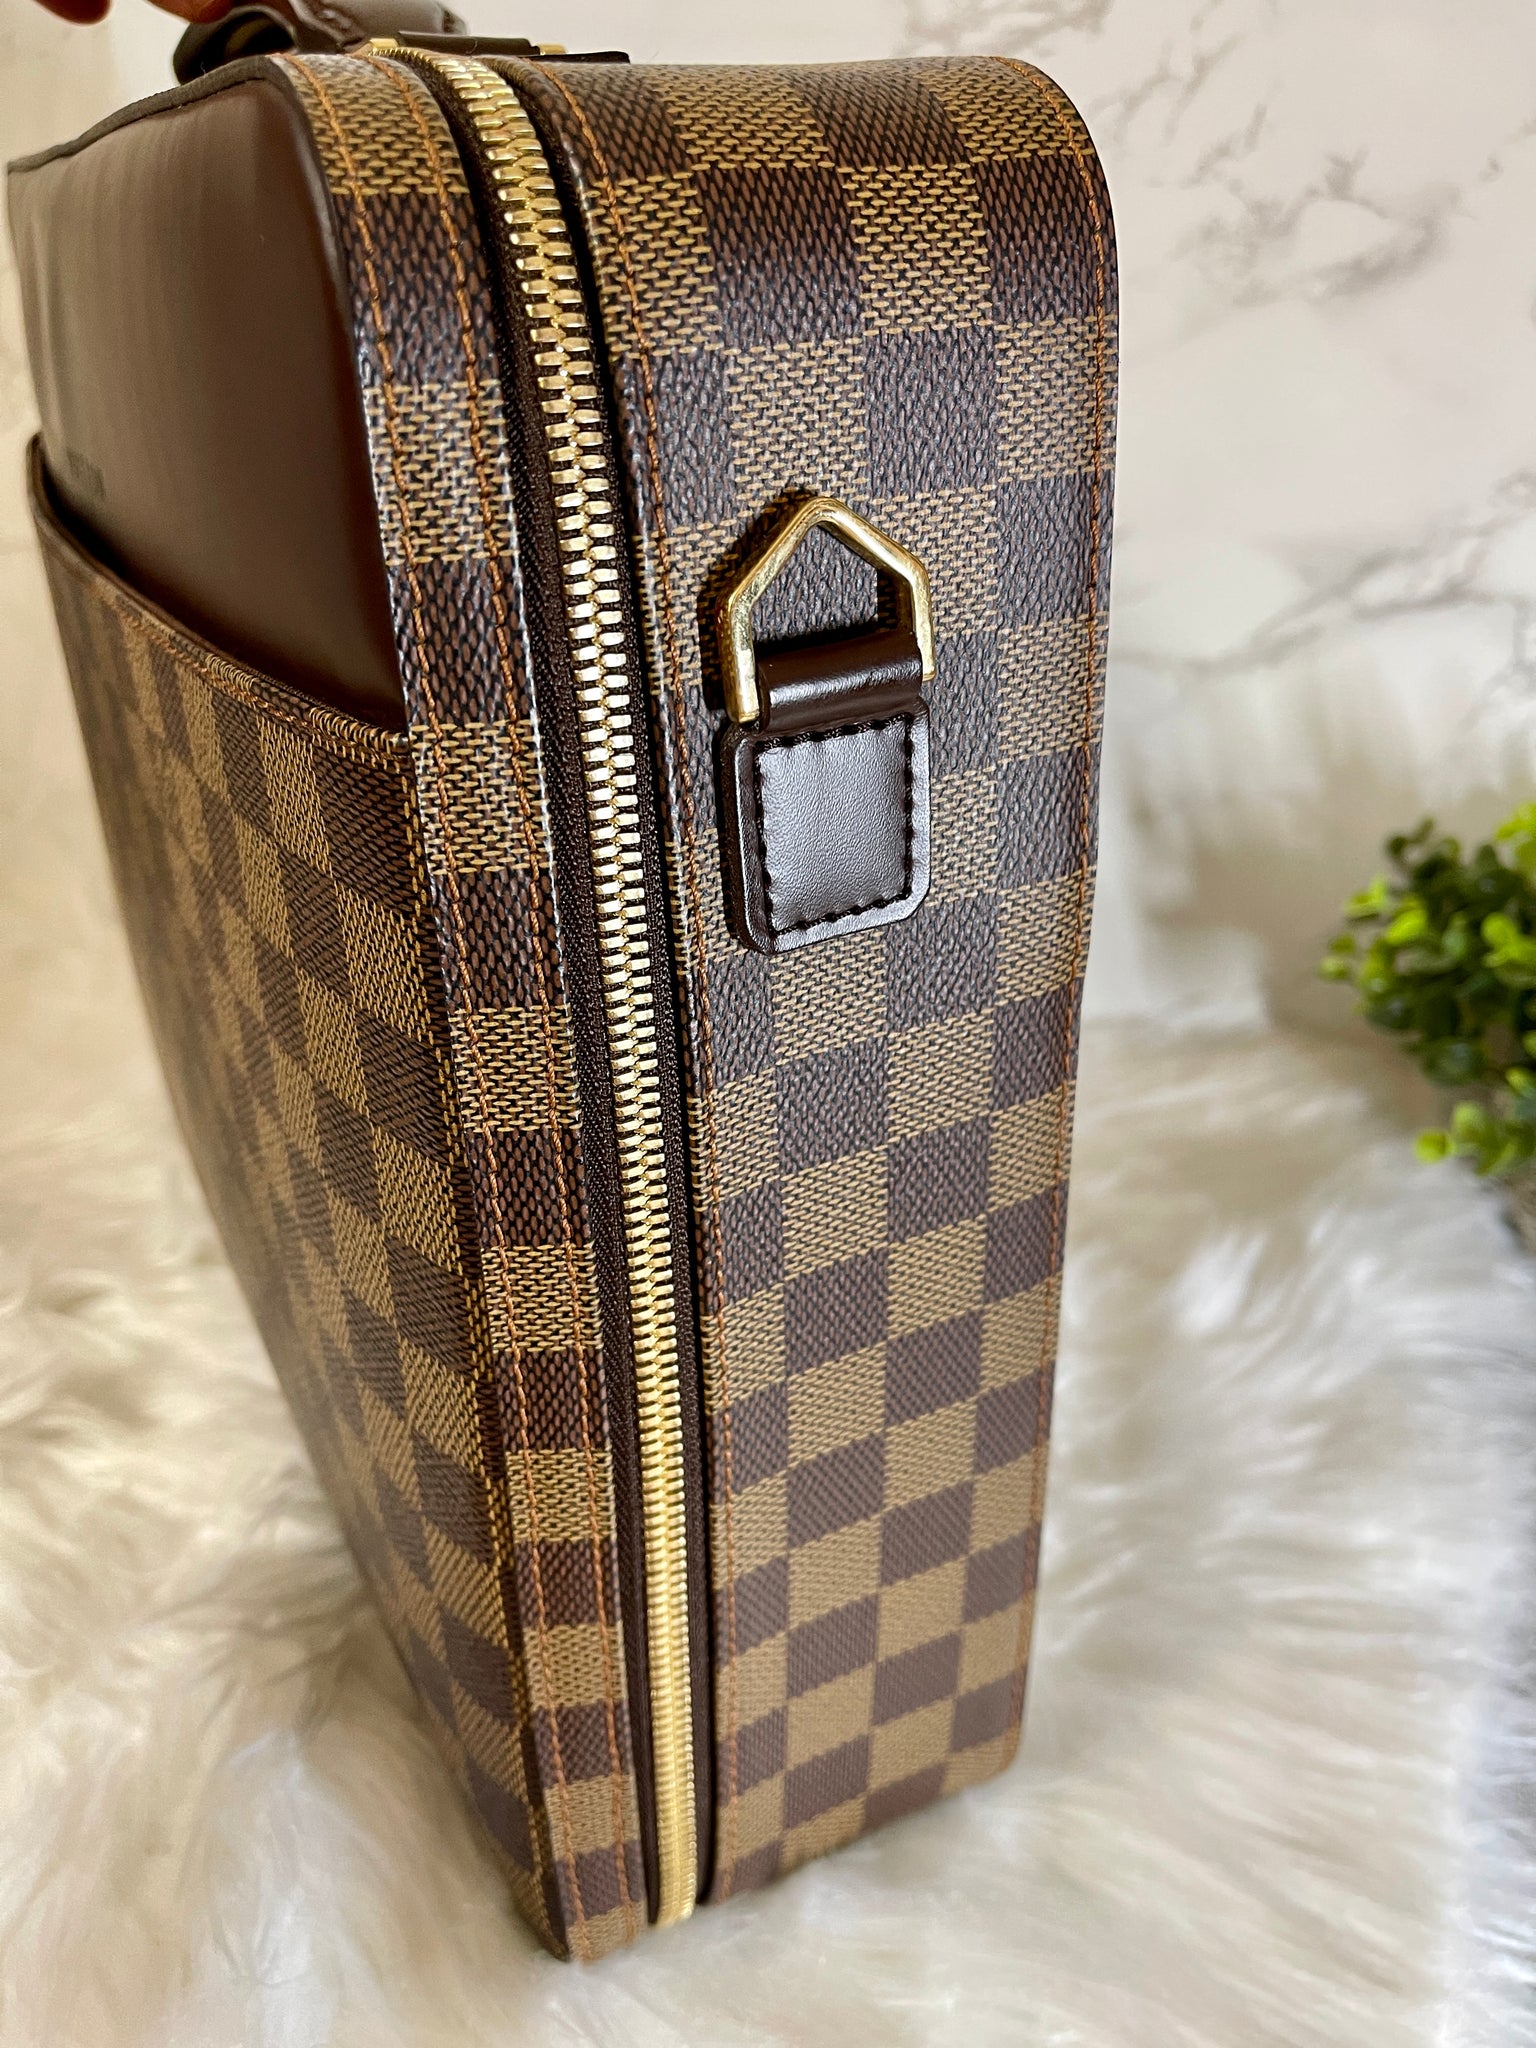 Louis Vuitton Sabana in damier canvas and brown leather